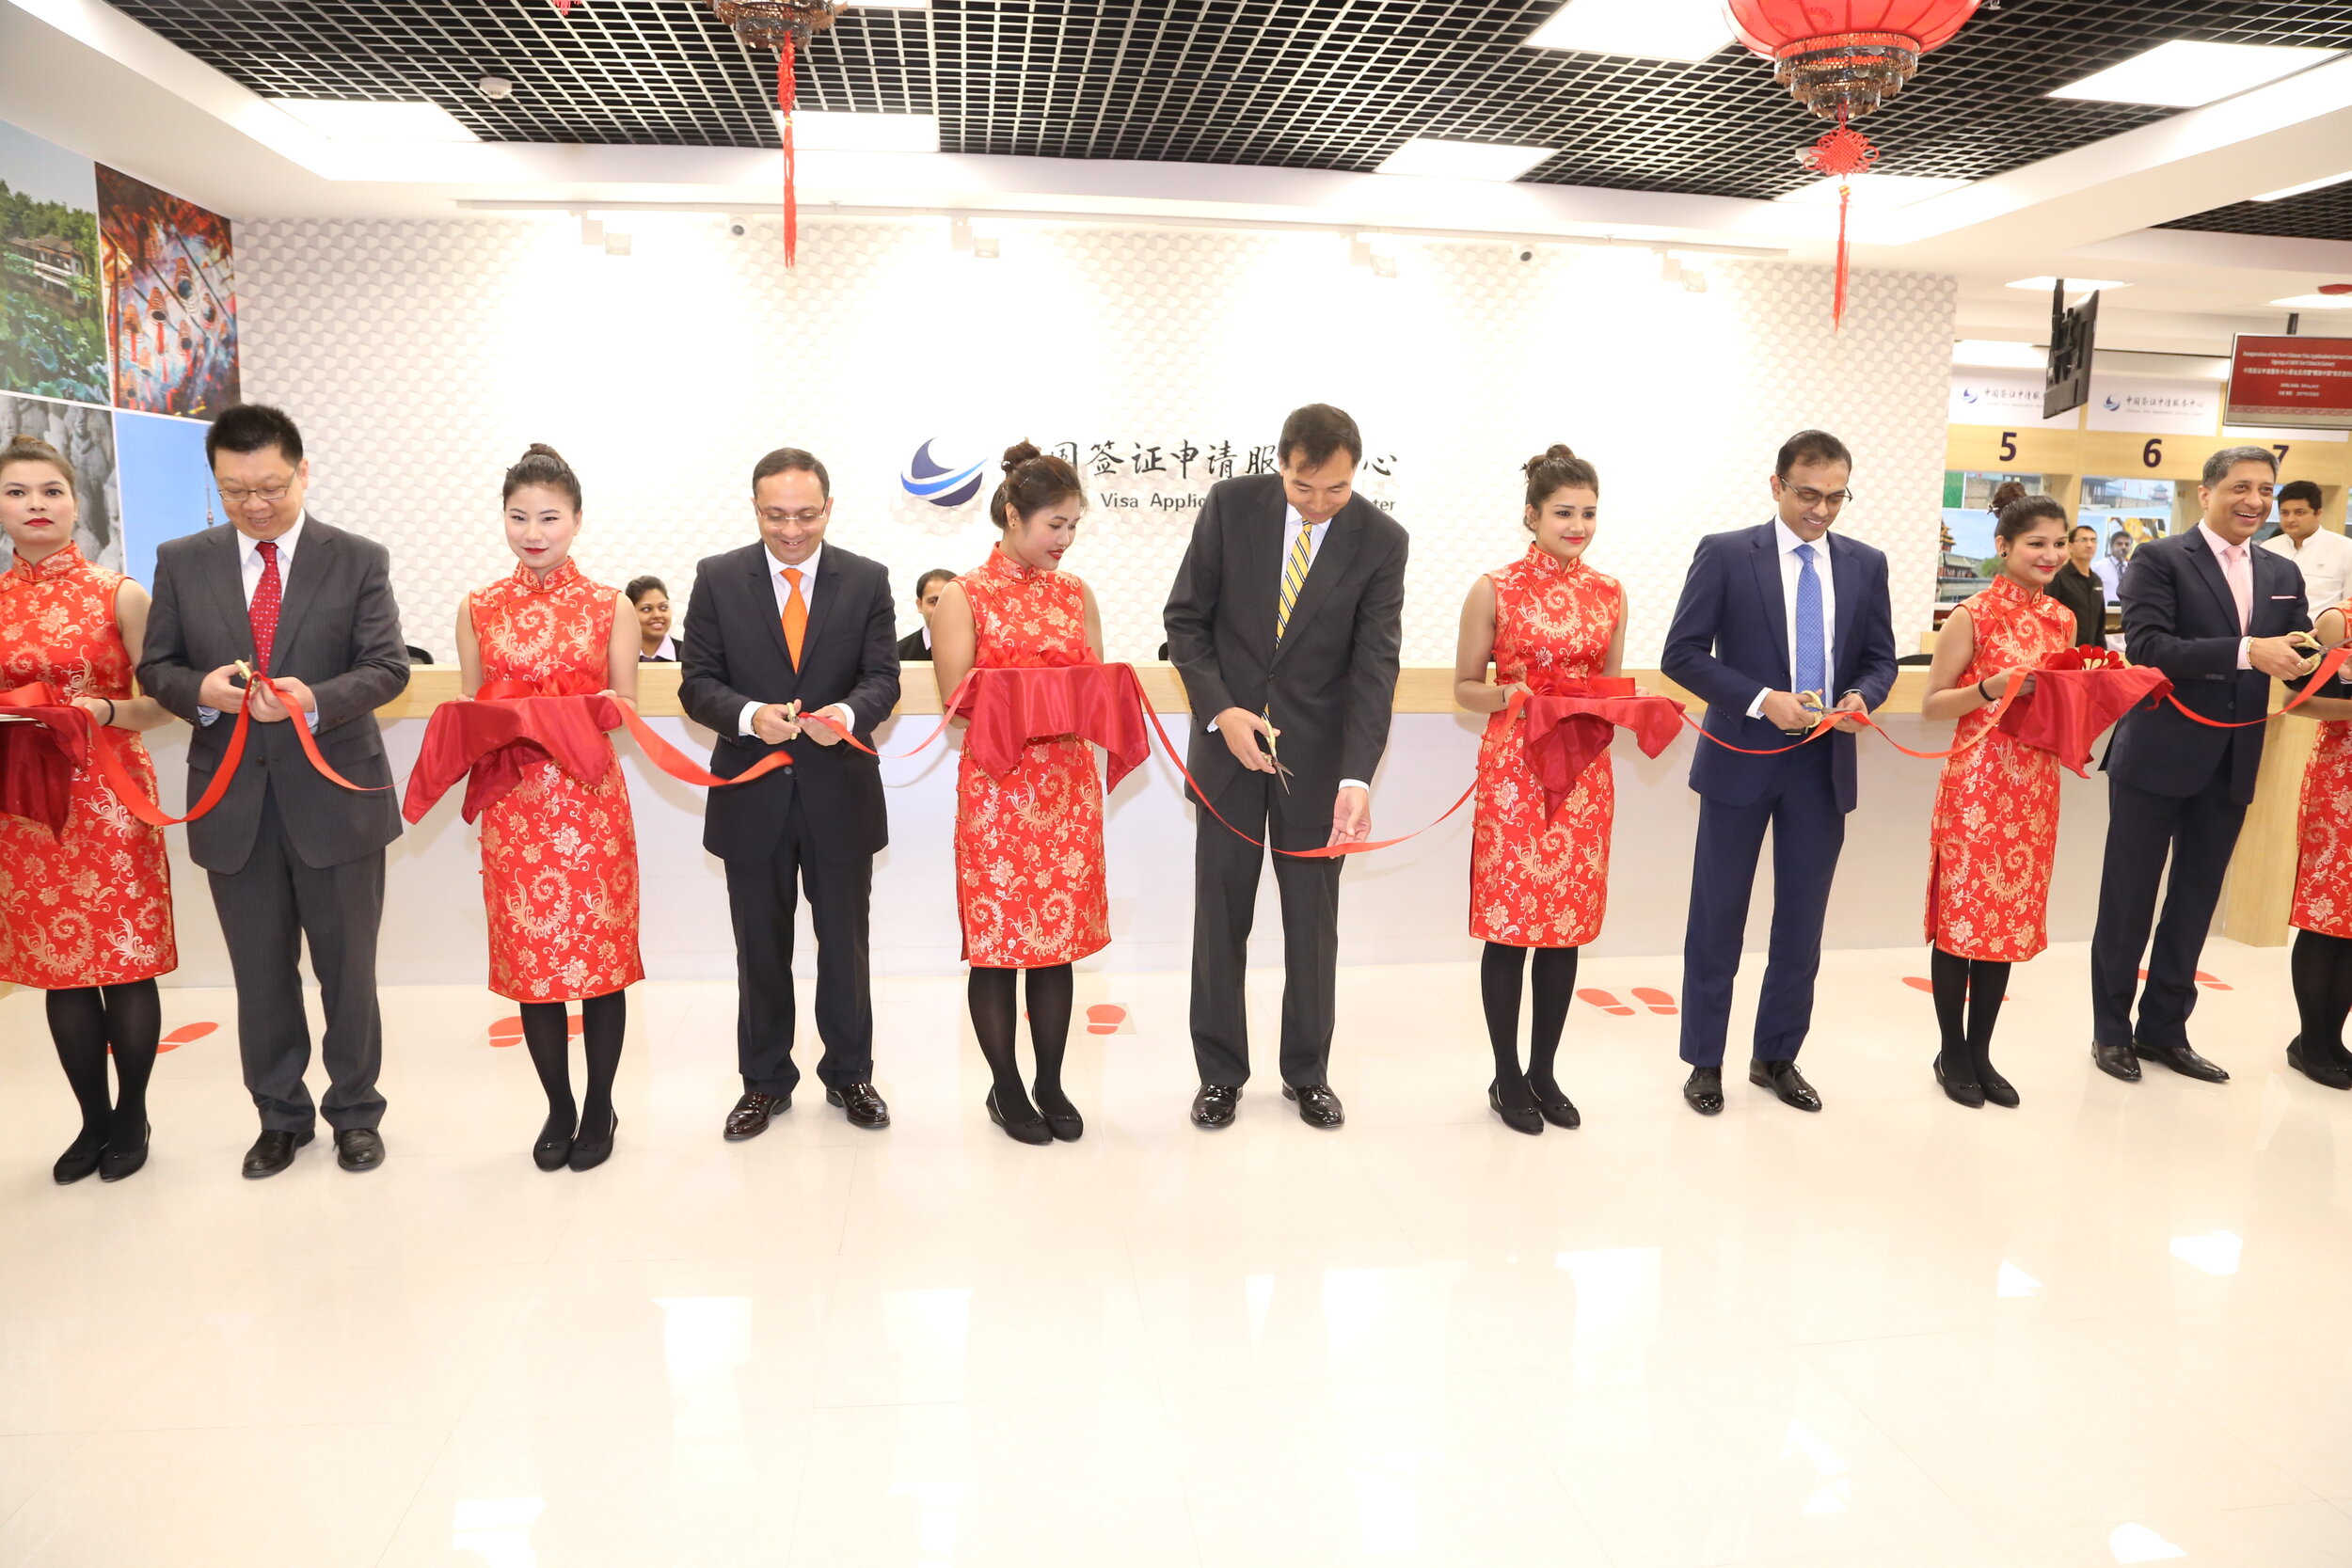  Inauguration of the New China Visa Application Service Center and Signing of MOU for China in Luxury -  Corporate Social Event